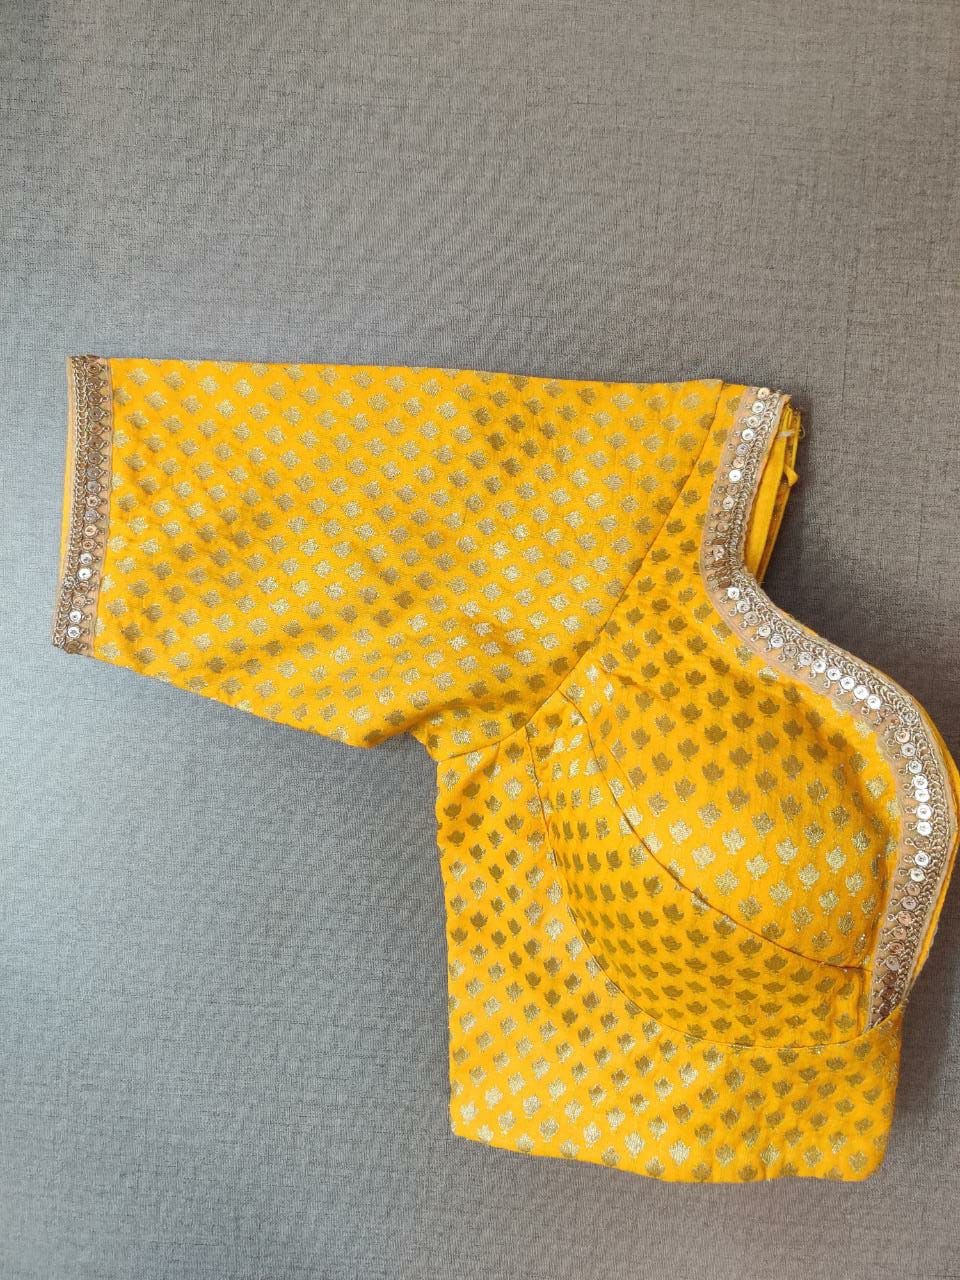 Shop gorgeous mango yellow Banarasi saree blouse online in USA with silver lace. Elevate your Indian ethnic saree looks with beautiful readymade sari blouse, embroidered saree blouses, Banarasi saree blouse, designer sari blouses, sleeveless saree blouses from Pure Elegance Indian fashion store in USA.-sleeves